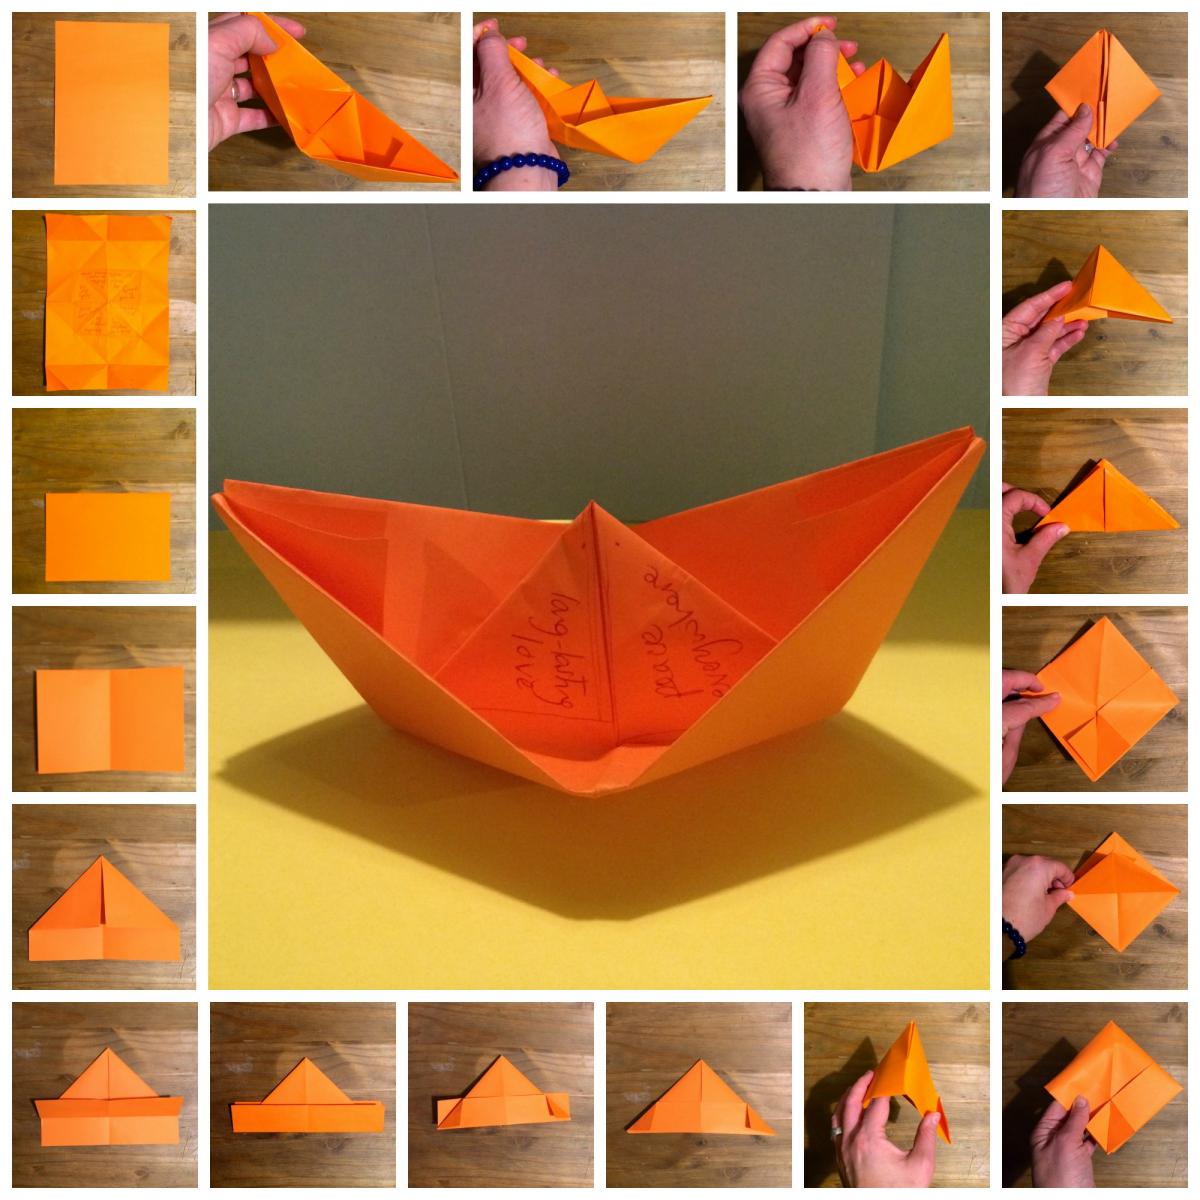 Scribble your hopes on a paper boat and sail them into your future with Story of Mum